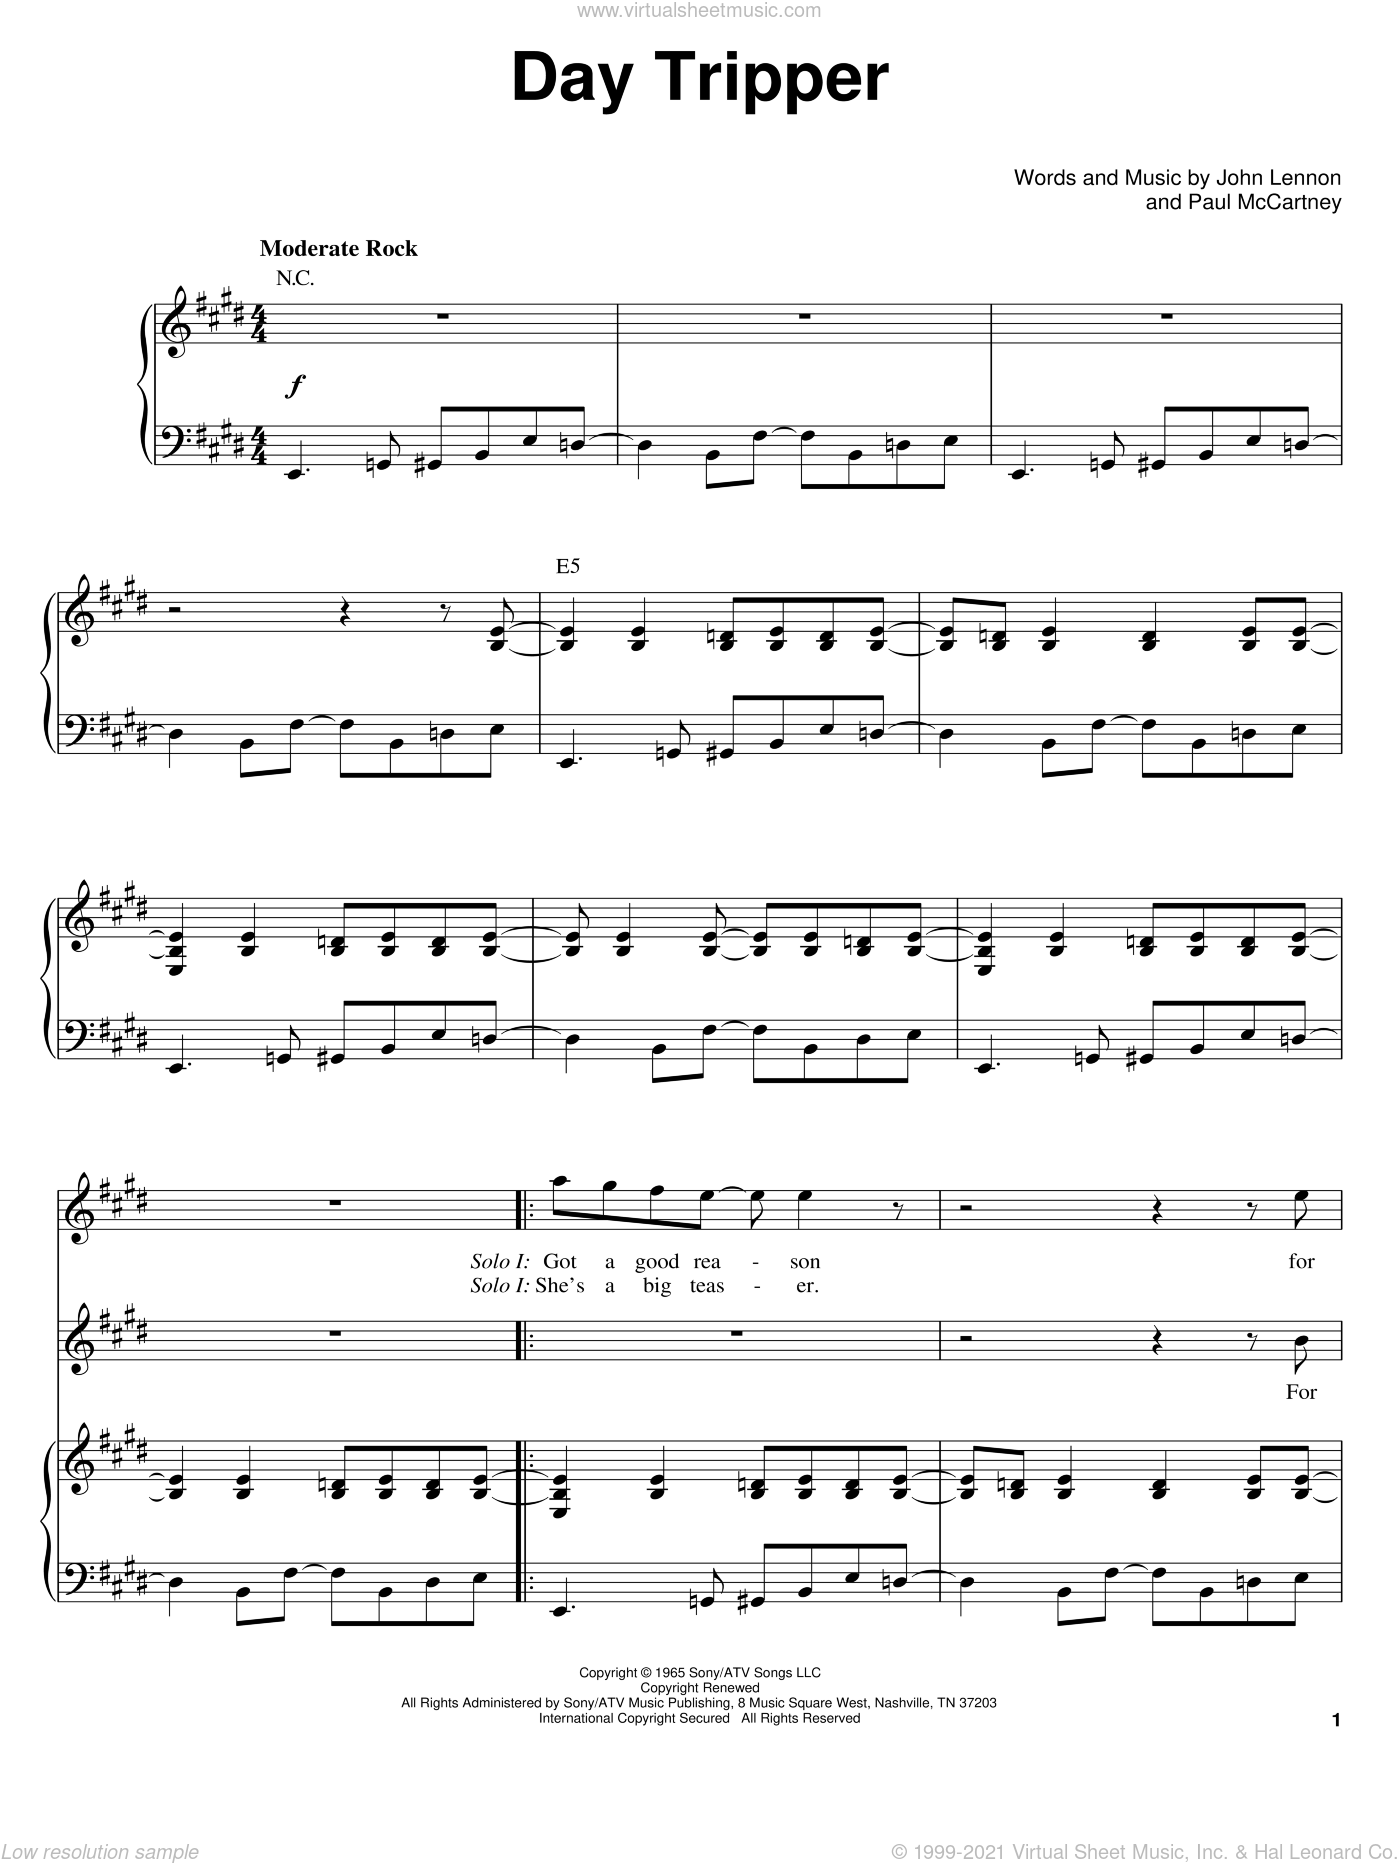 Beatles - Day Tripper sheet music for voice and piano (PDF)